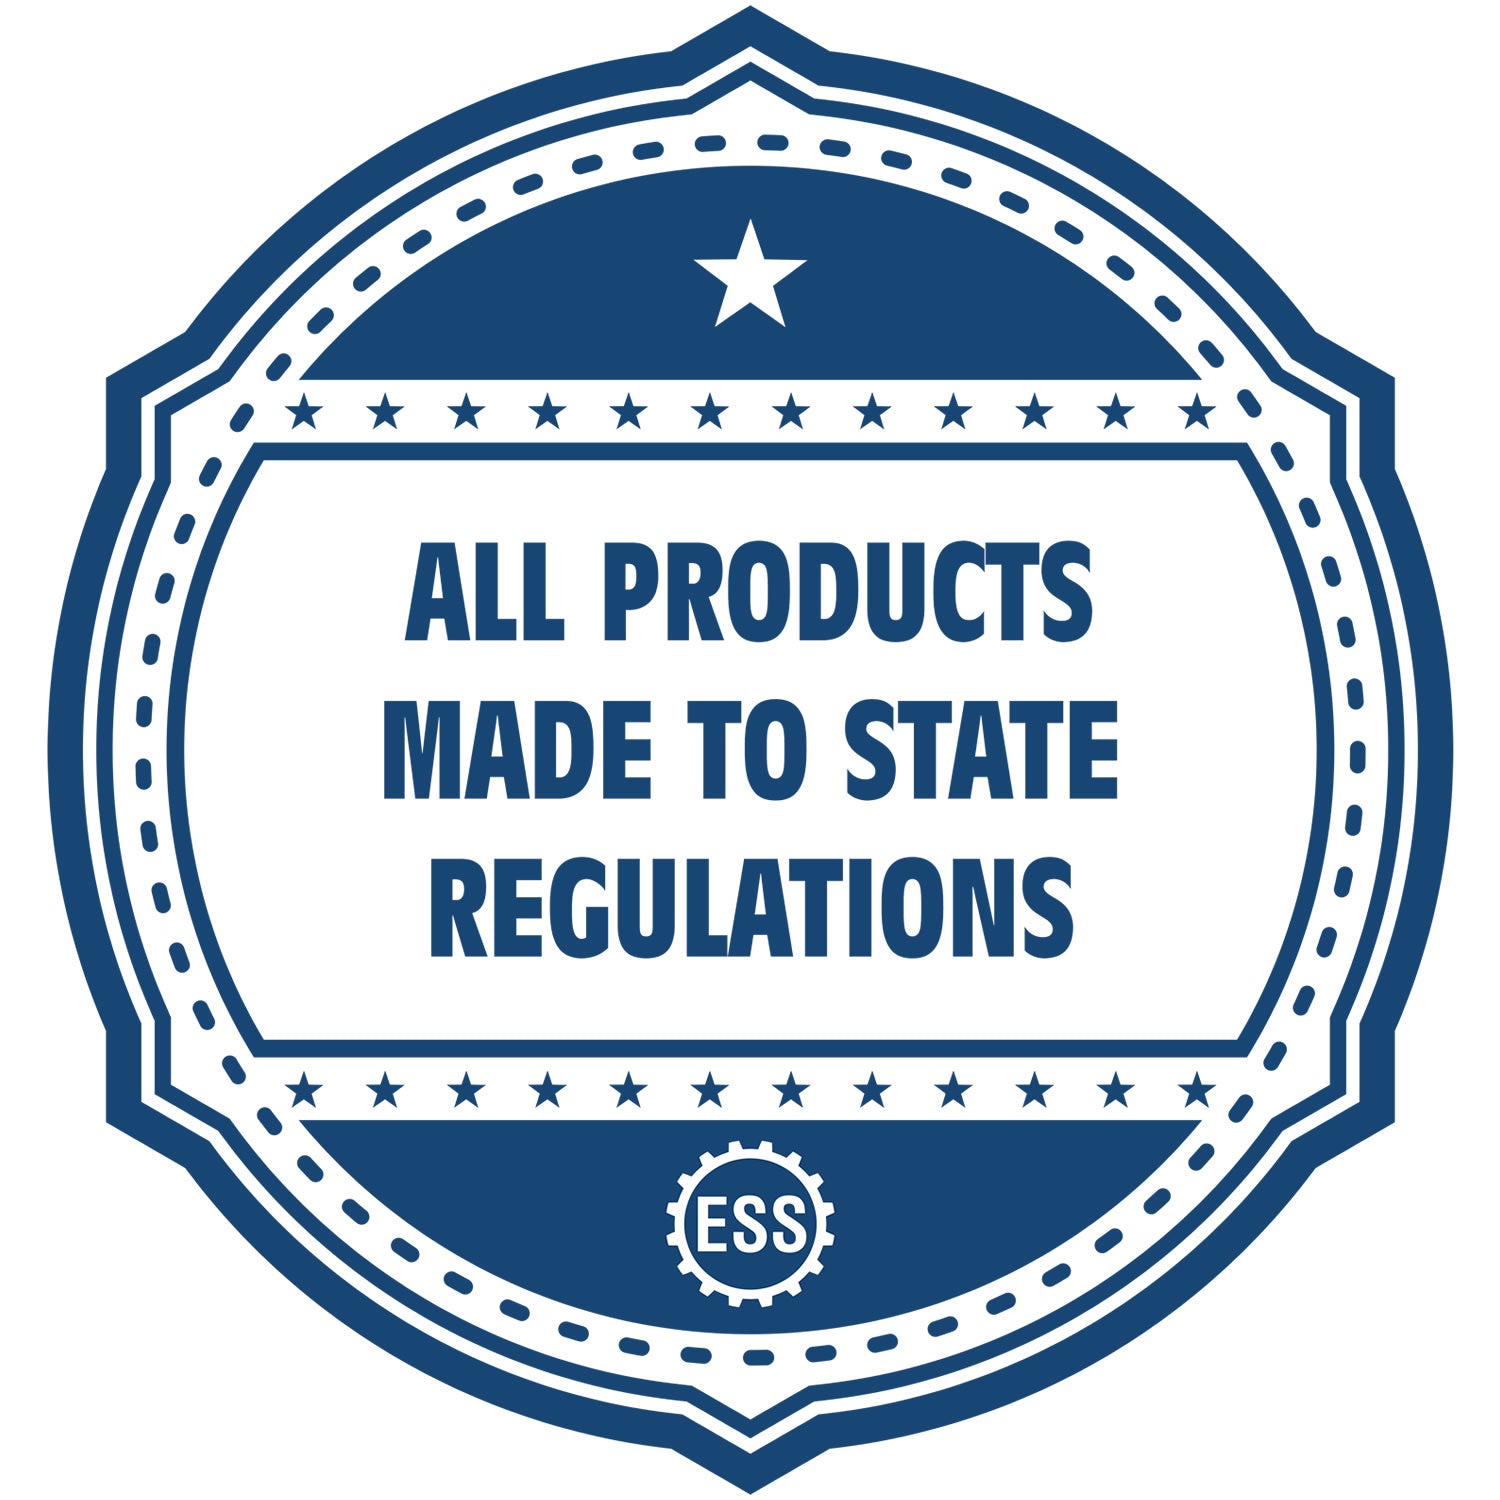 An icon or badge element for the North Dakota Desk Surveyor Seal Embosser showing that this product is made in compliance with state regulations.